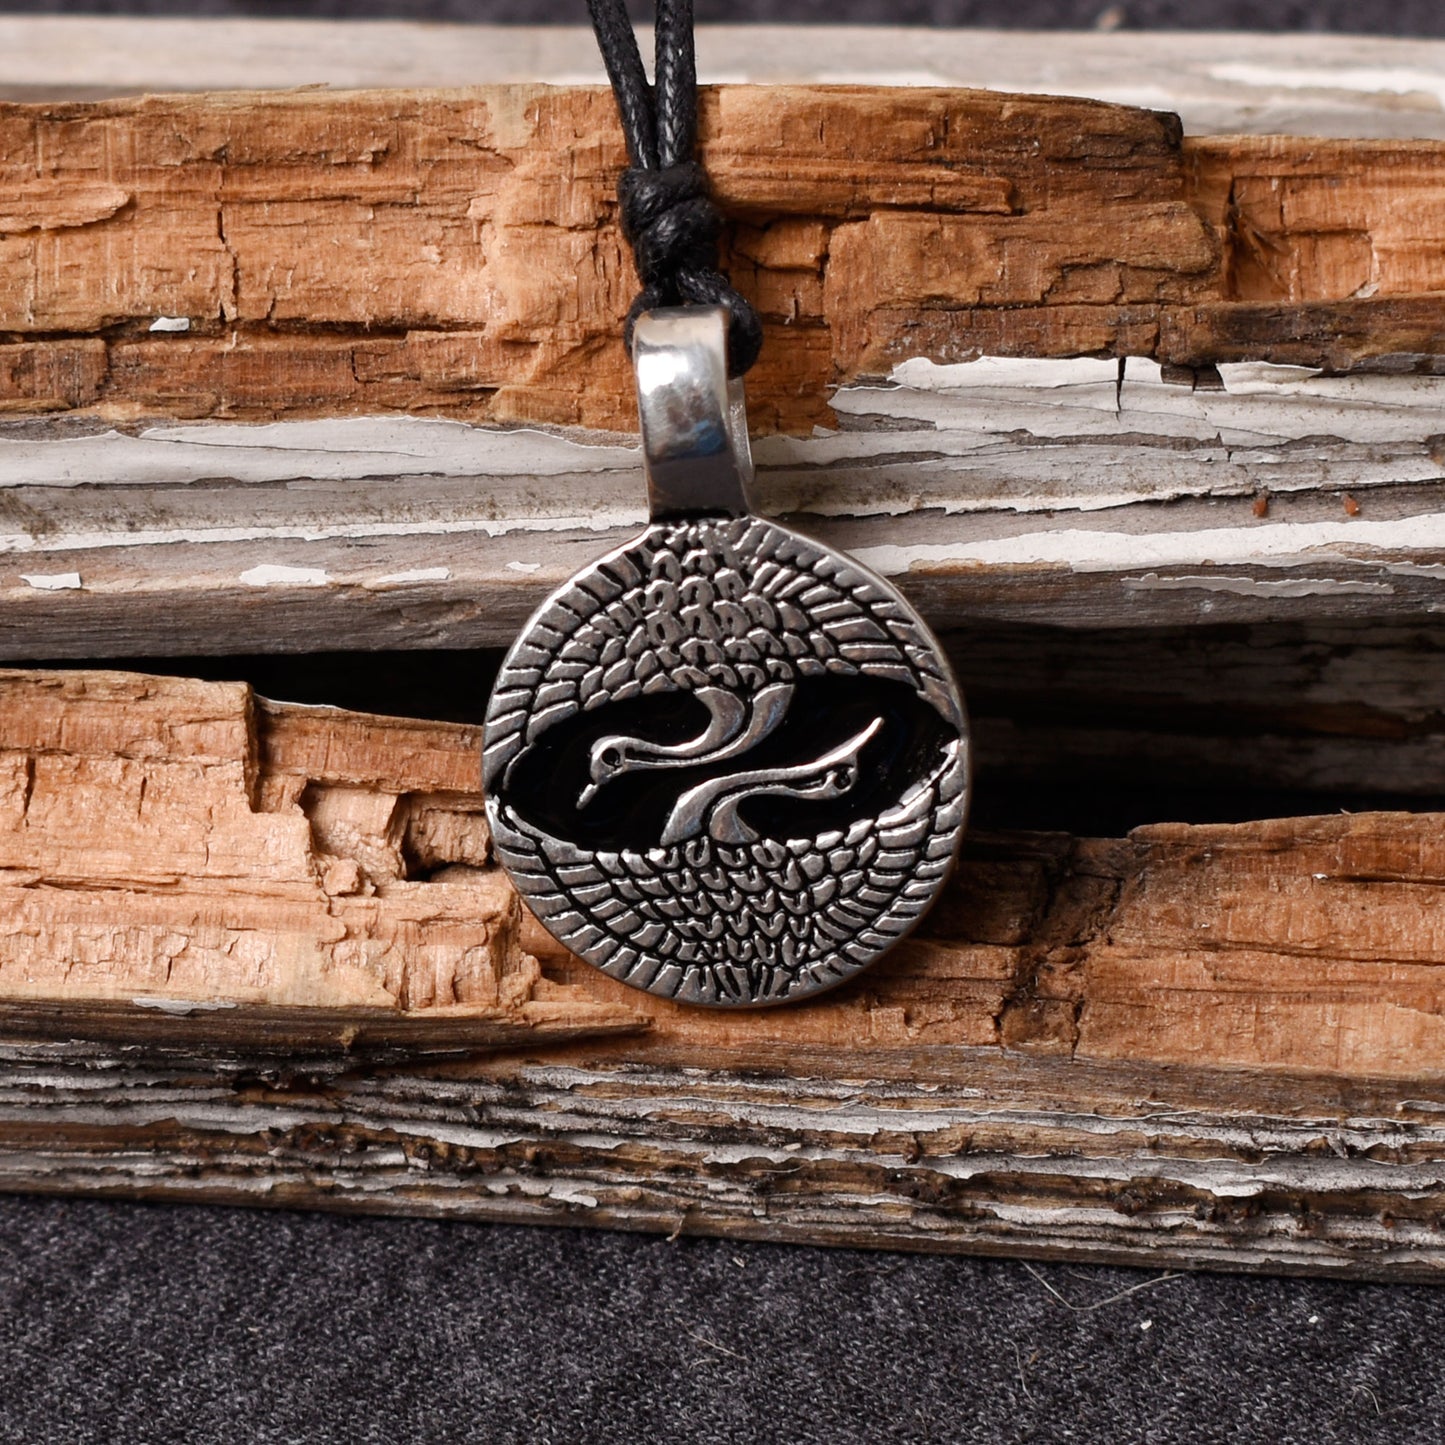 Colorful Swan Ying Yang Silver Pewter Charm Necklace Pendant Jewelry